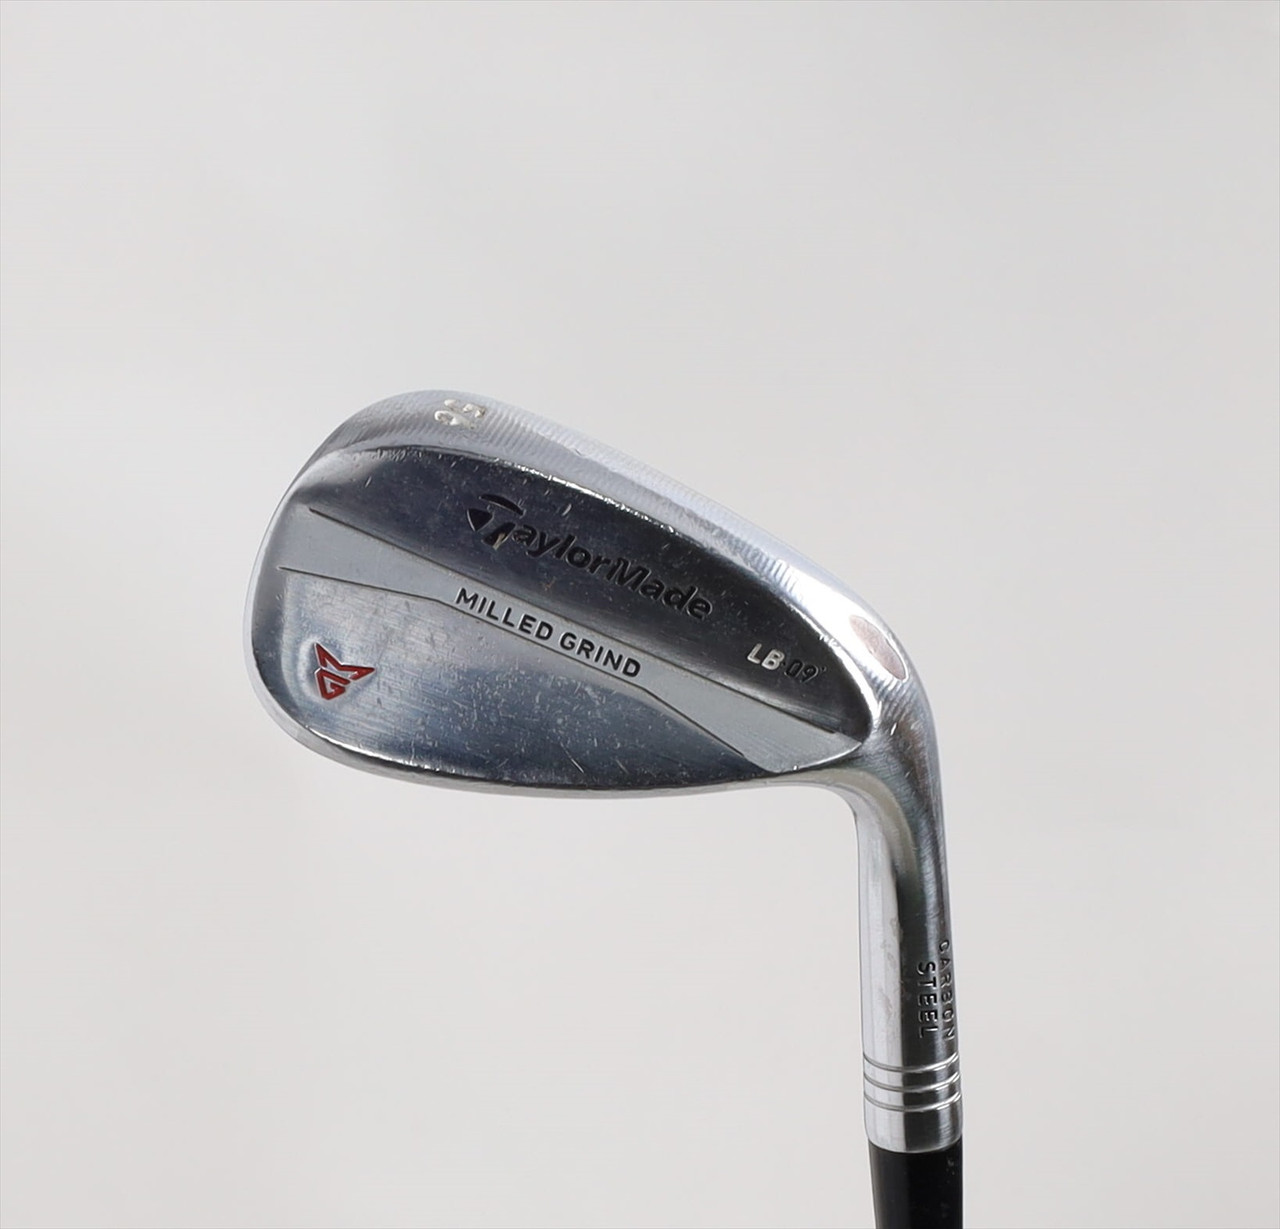 Taylormade Milled Grind 2 Chrome Wedge 56°-9 Wedge Dynamic Gold